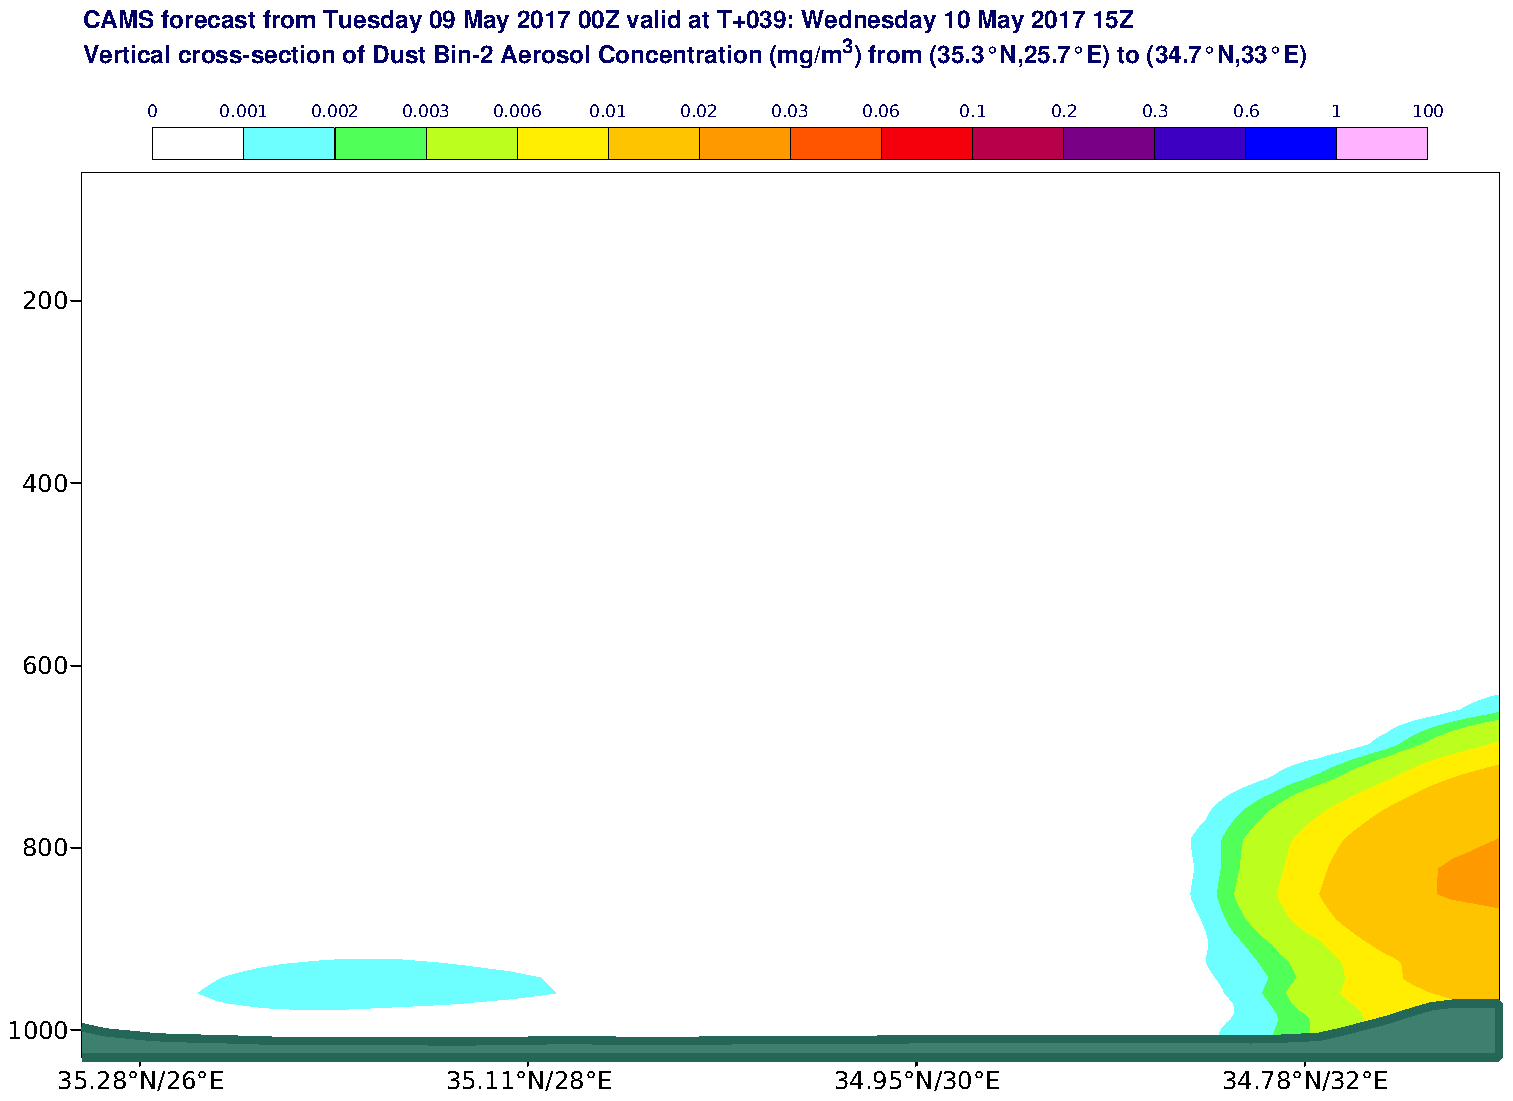 Vertical cross-section of Dust Bin-2 Aerosol Concentration (mg/m3) valid at T39 - 2017-05-10 15:00